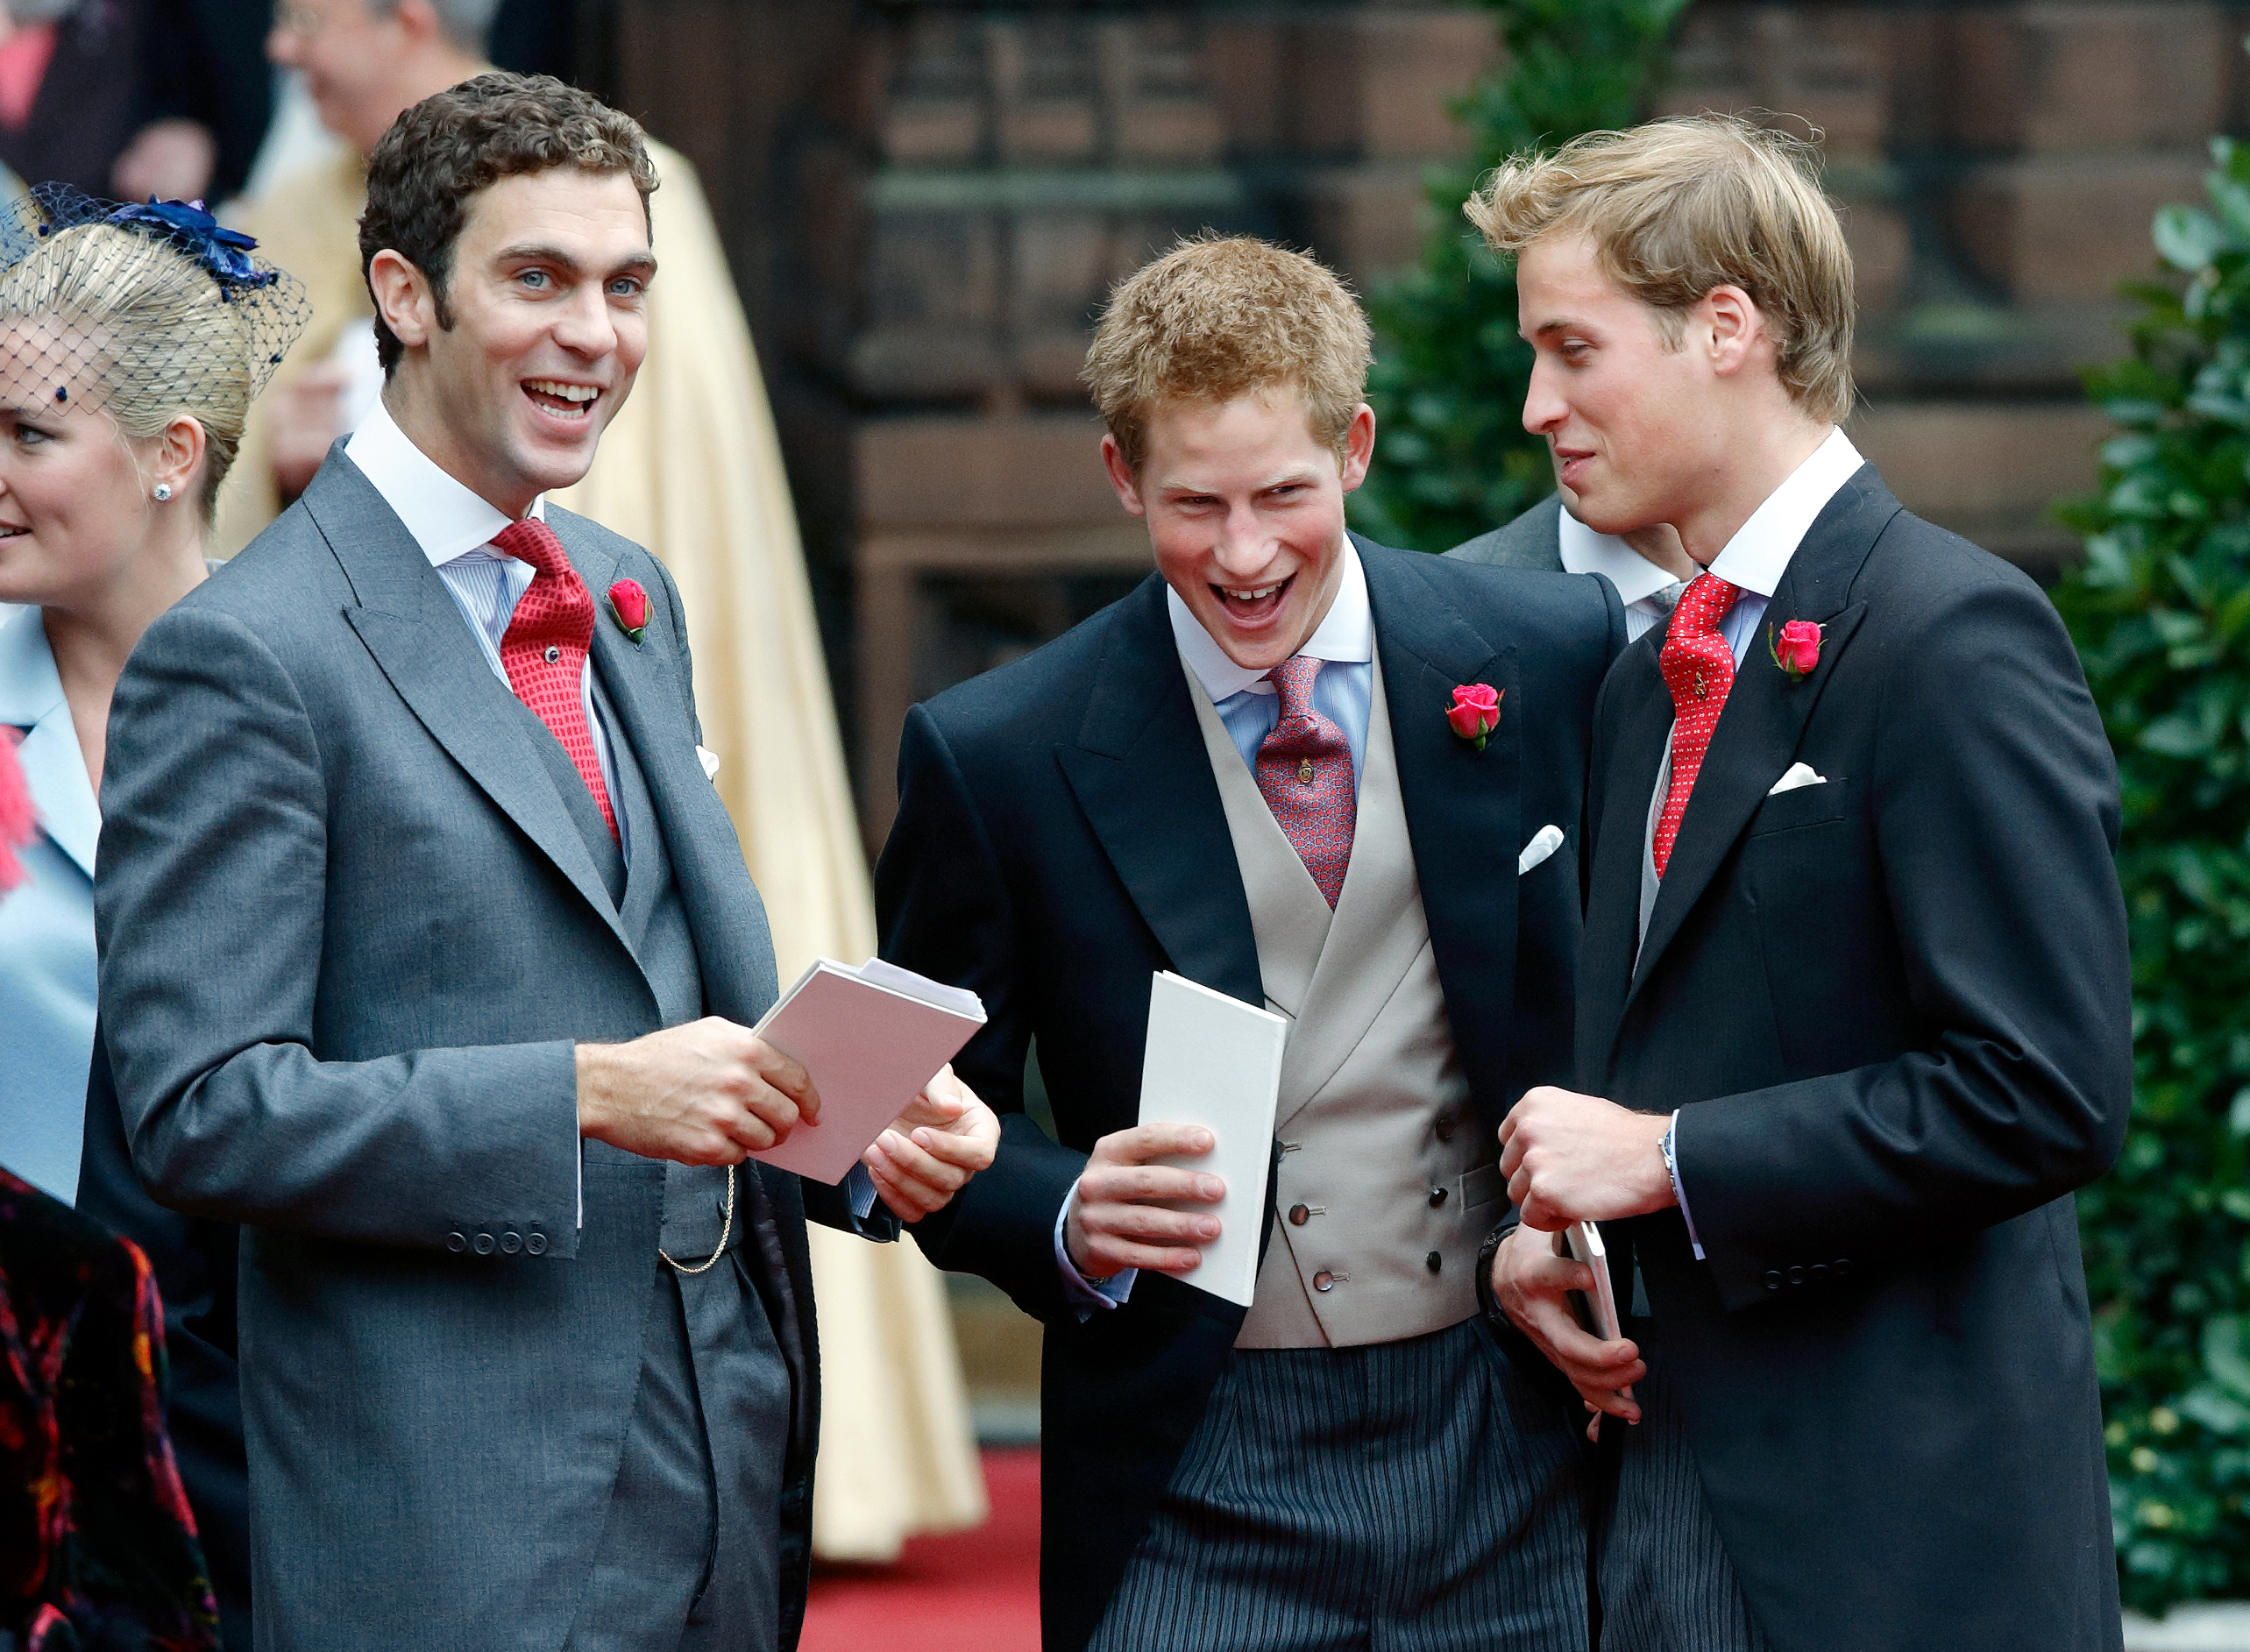 Hugh van Cutsem, Prince Harry, and Prince William at the wedding of Edward van Cutsem and Lady Tamara Grosvenor on November 6, 2004, in Chester, England | Source: Getty Images